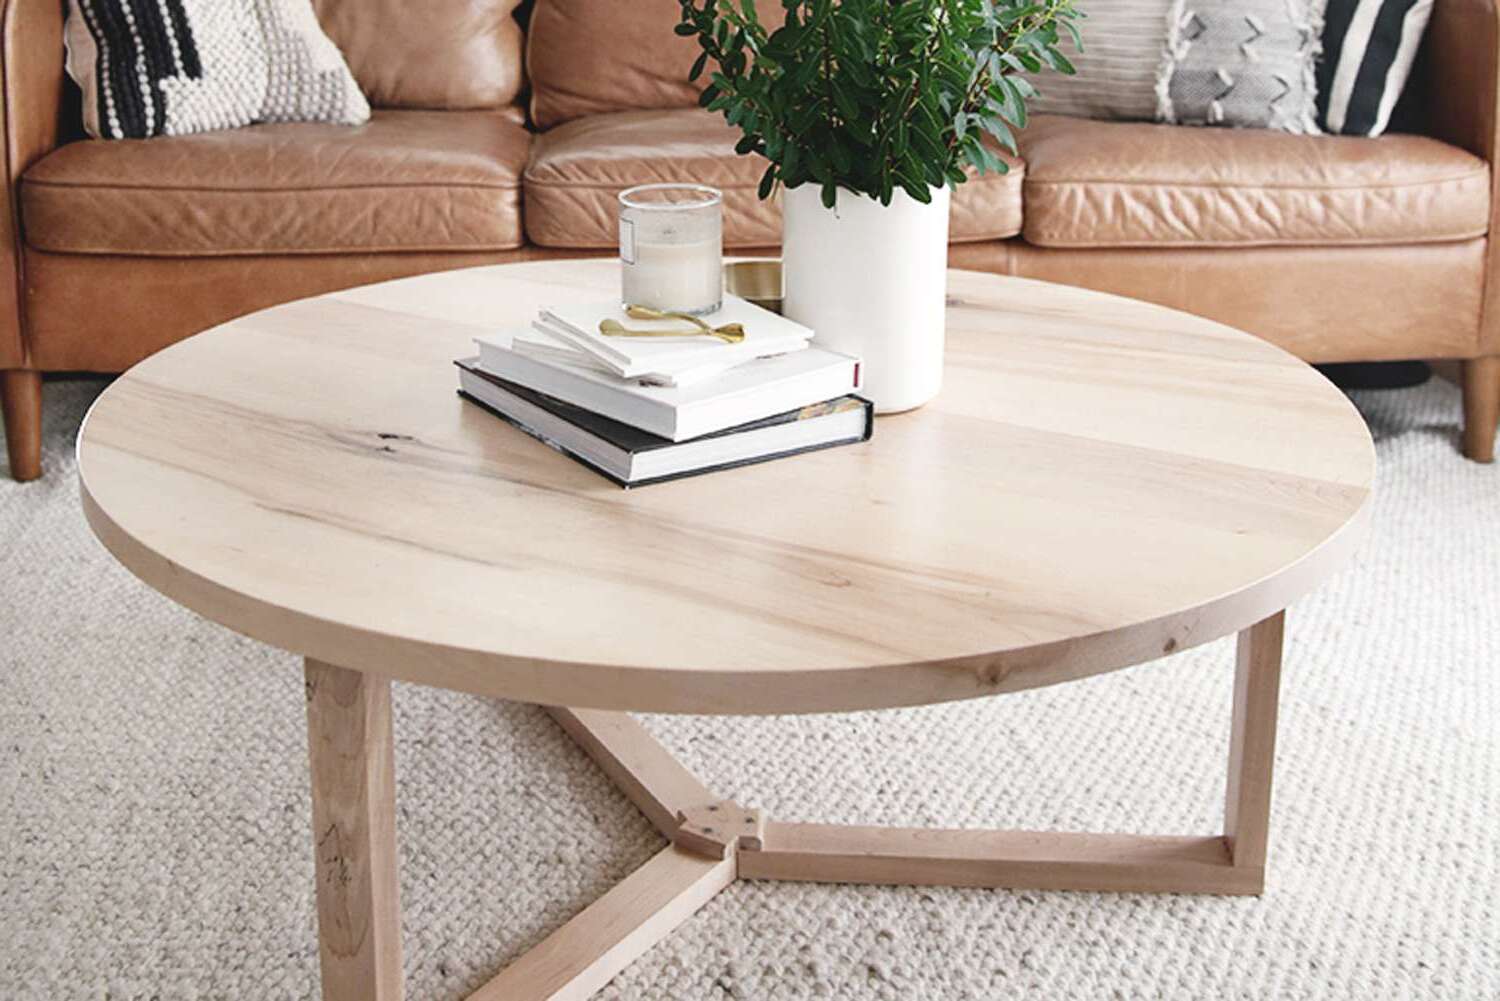 DIY Coffee Table: Create Your Own Stylish And Functional Piece